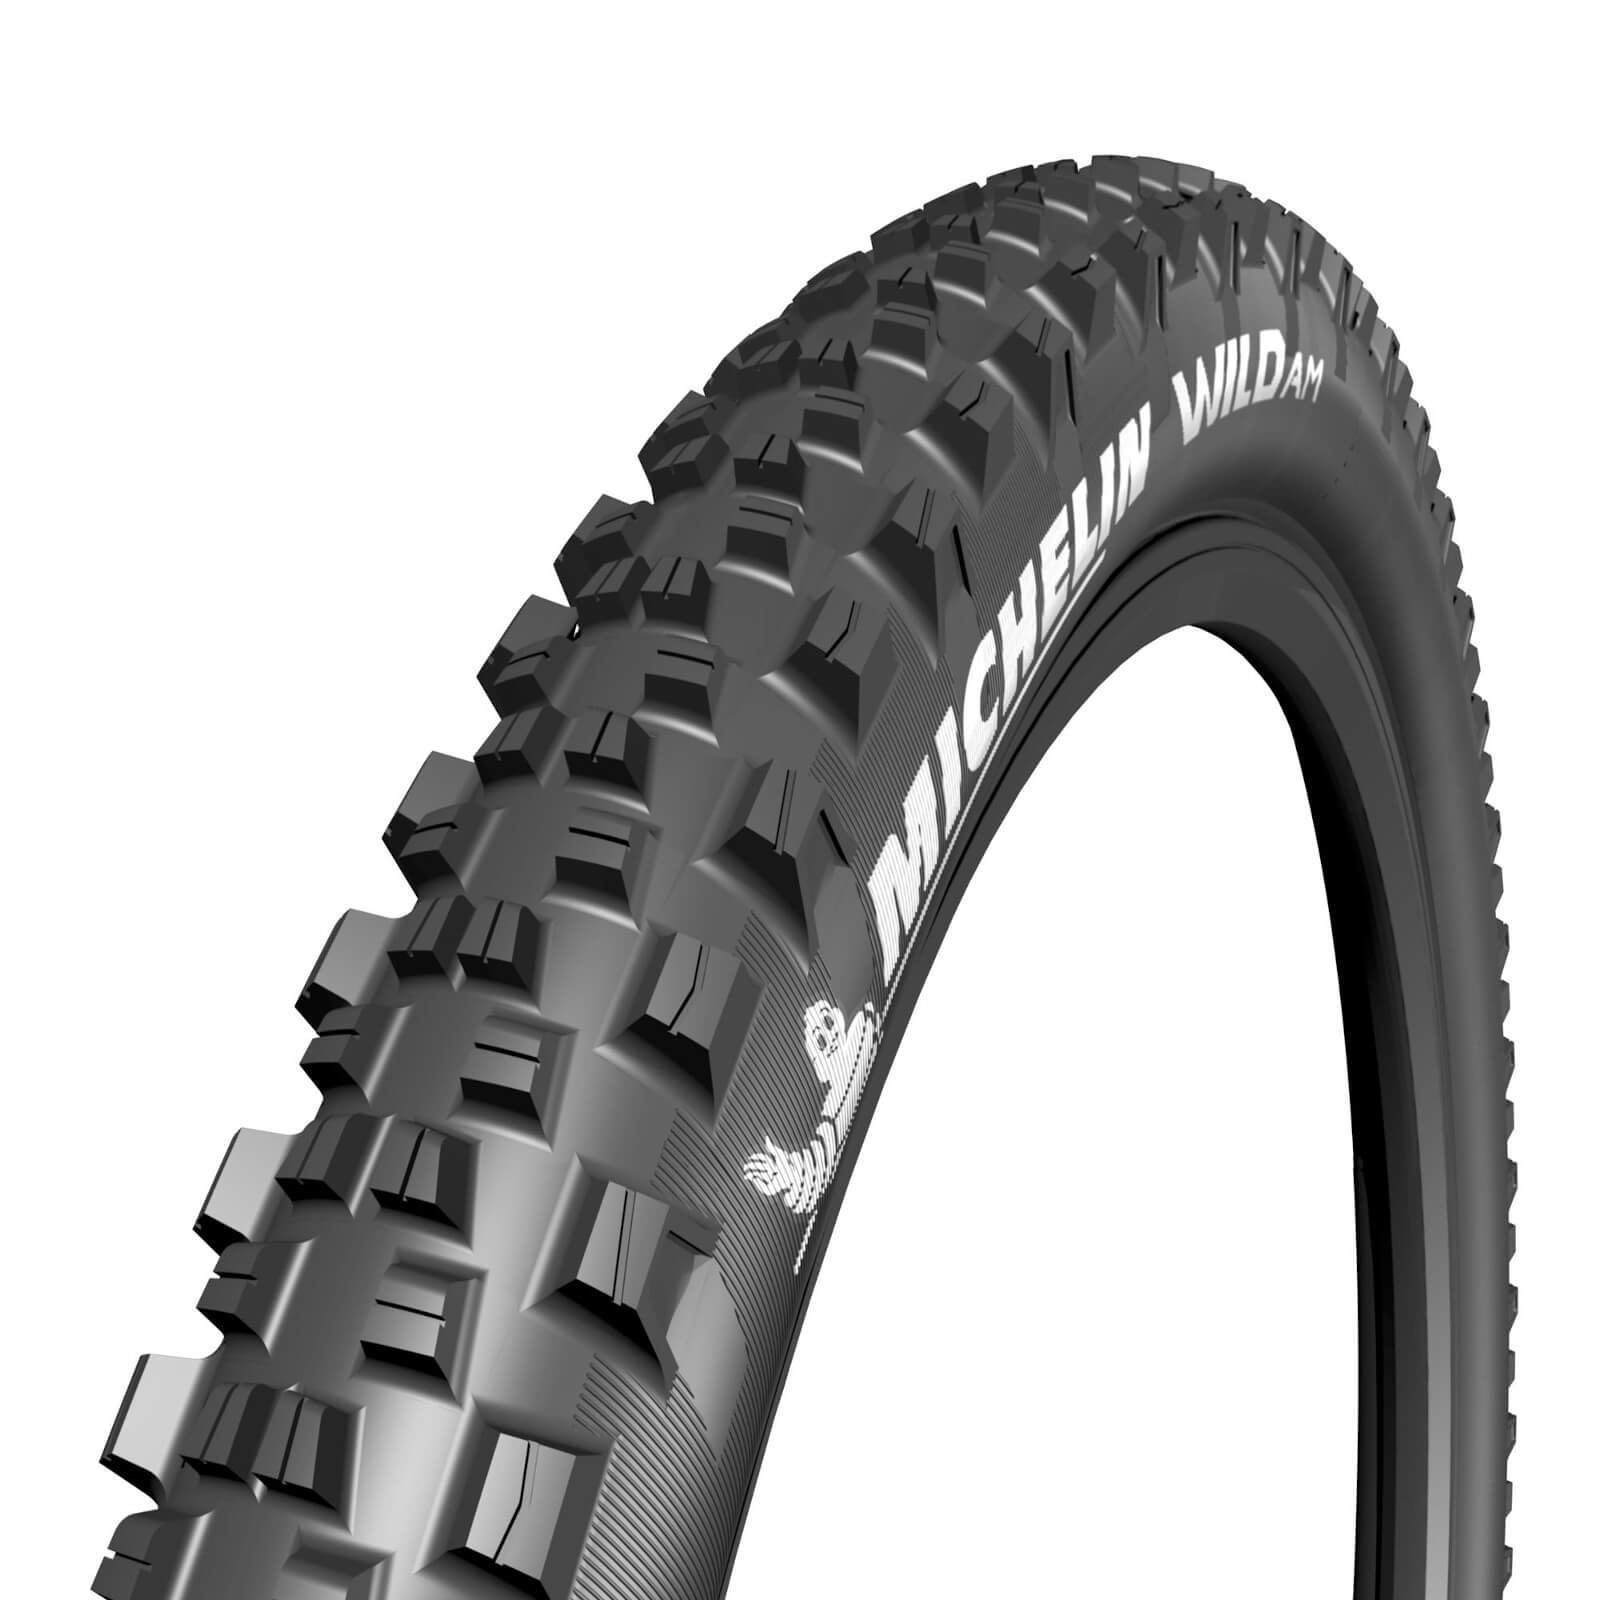 Michelin Wild AM Competition Line MTB Tyre - 27.5x2.80